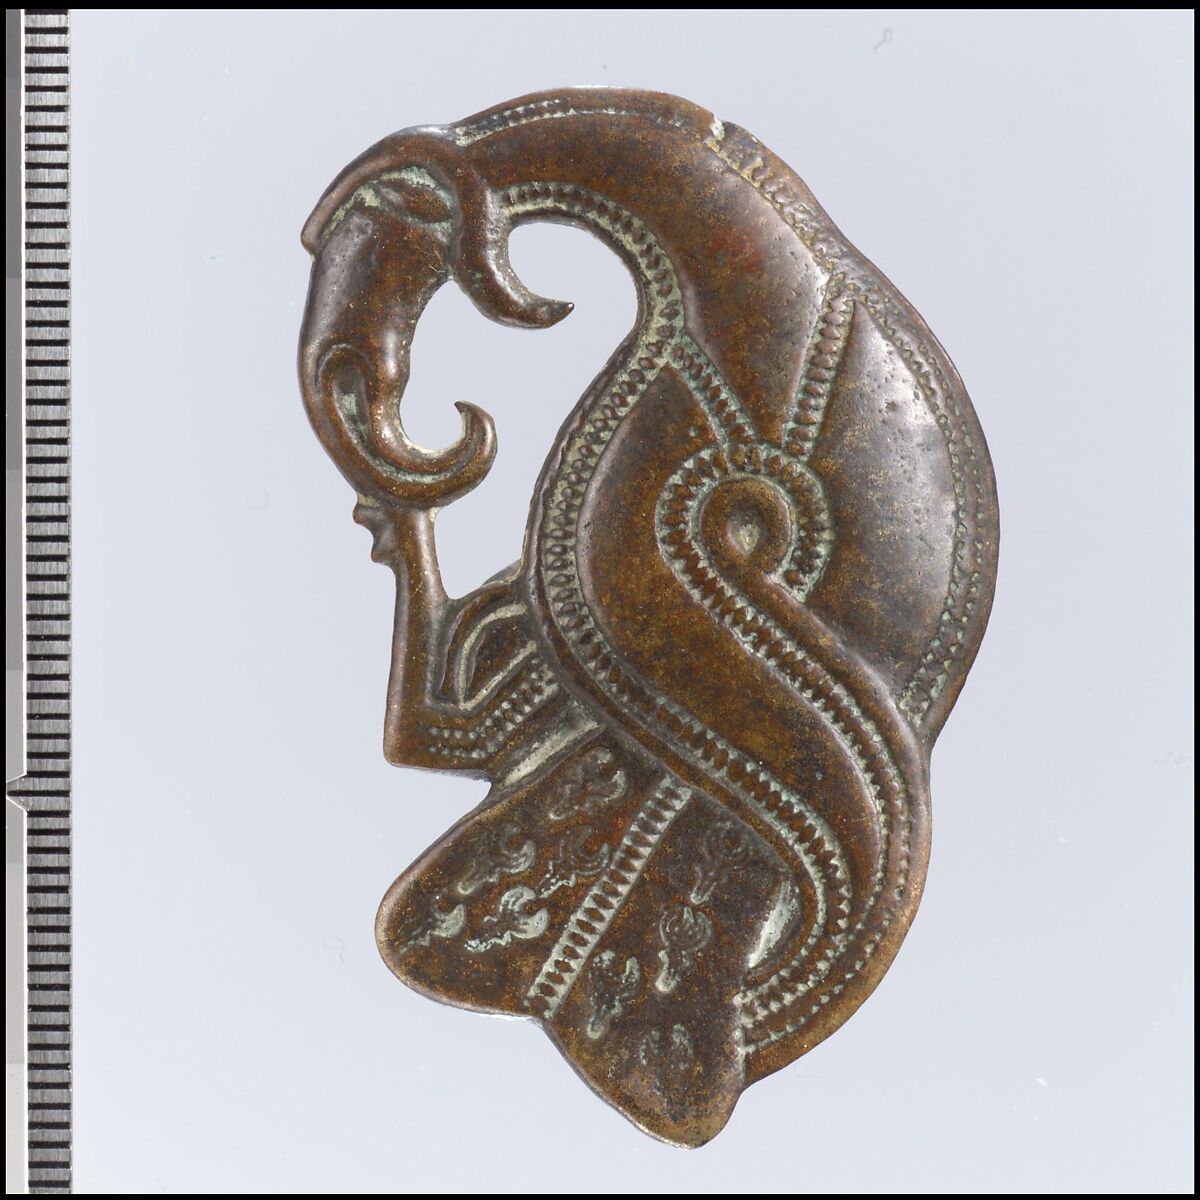 Brooch in Form of a Bird of Prey, Copper alloy with silver overlay, Vendel 